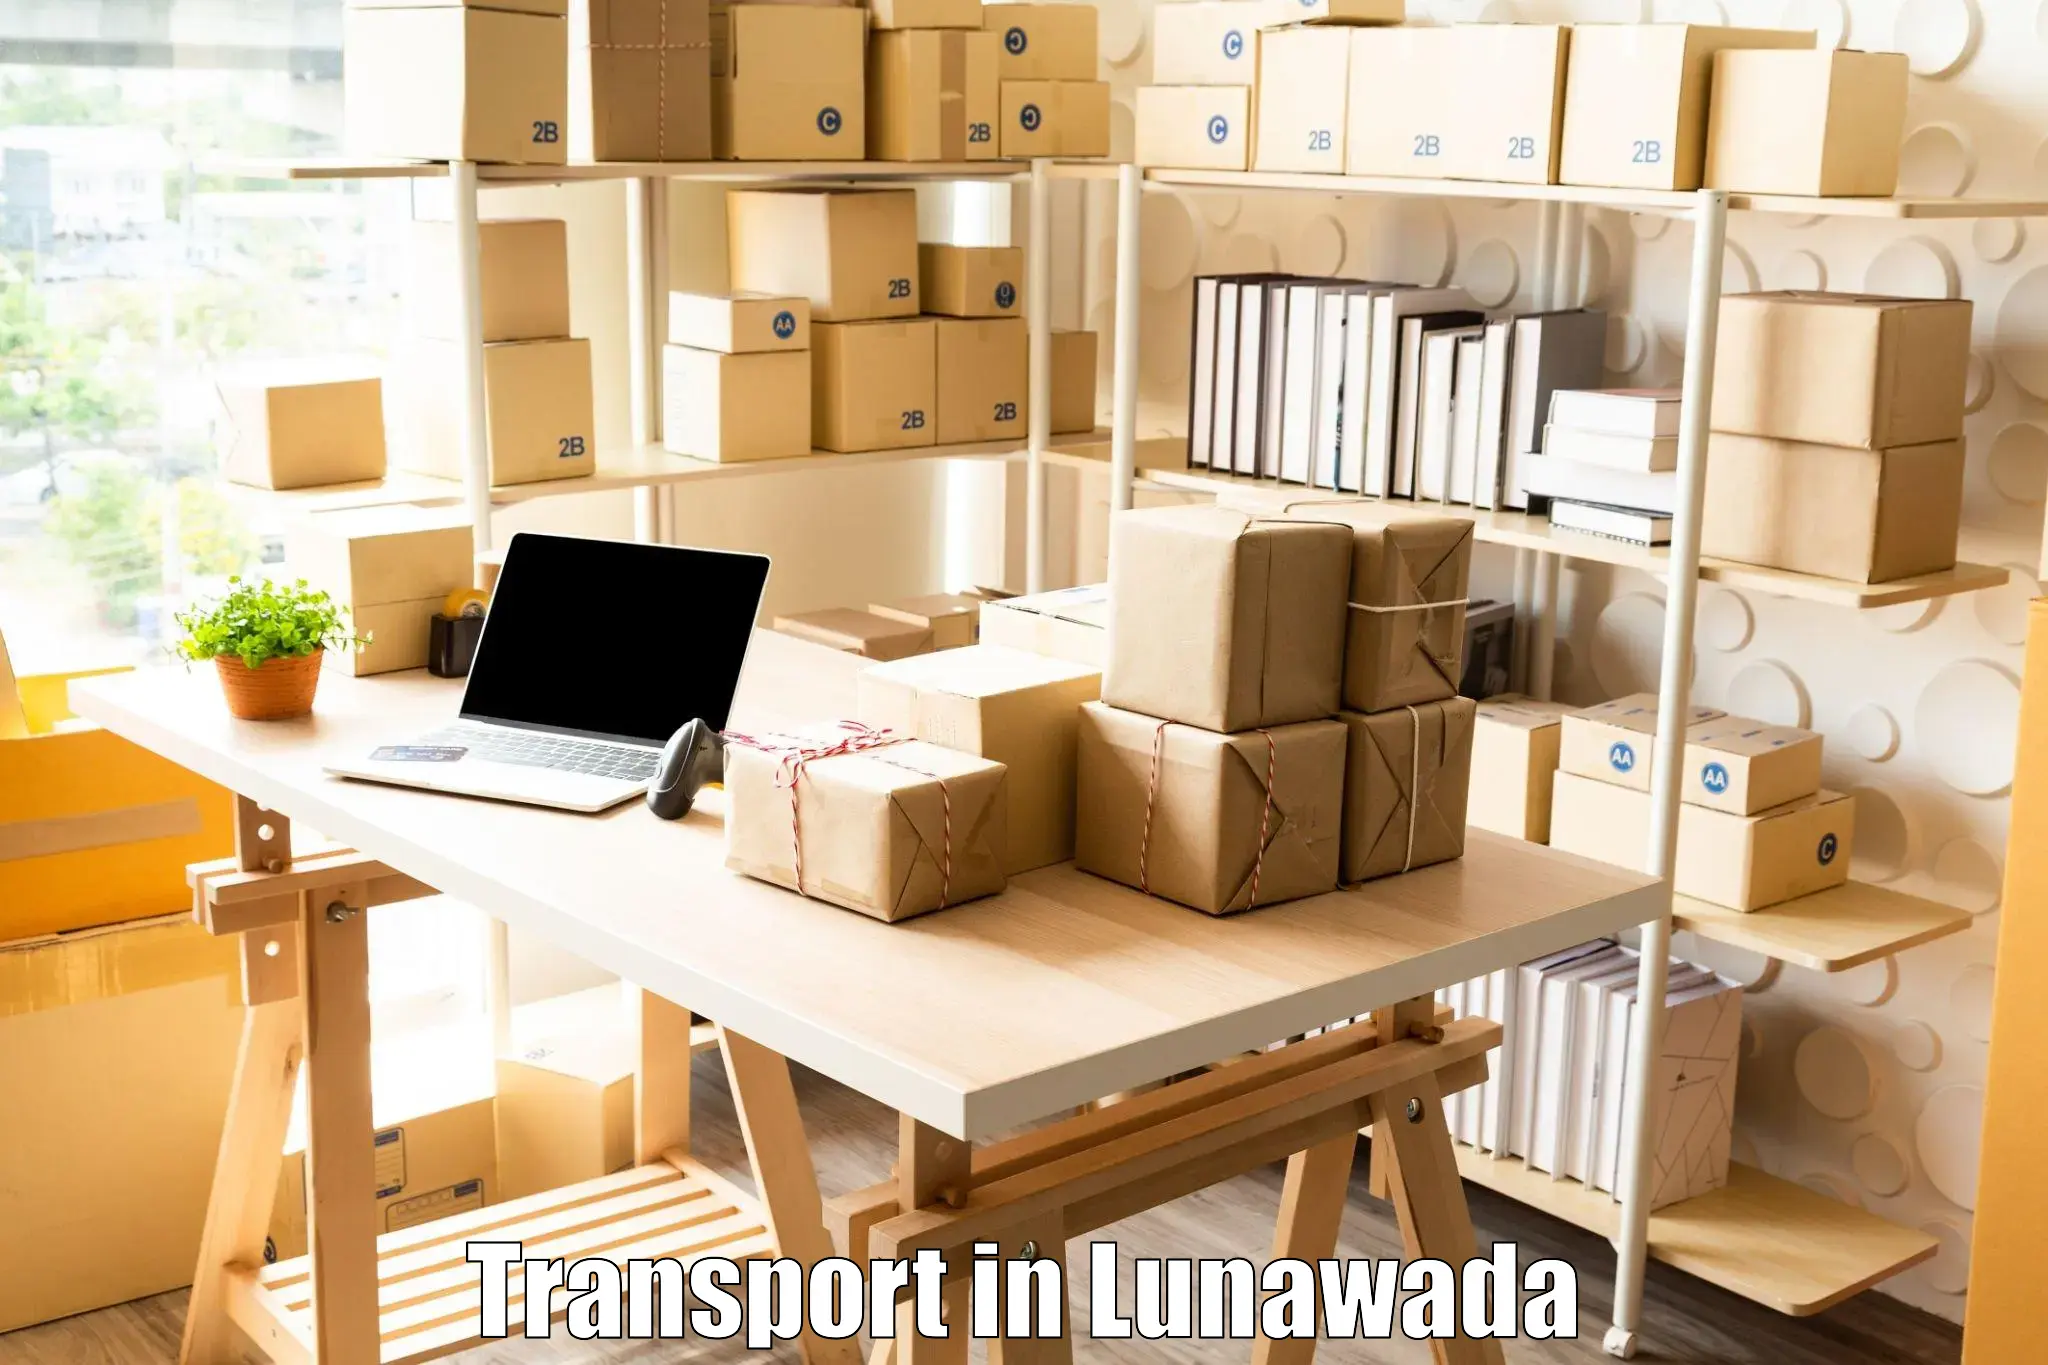 Vehicle courier services in Lunawada